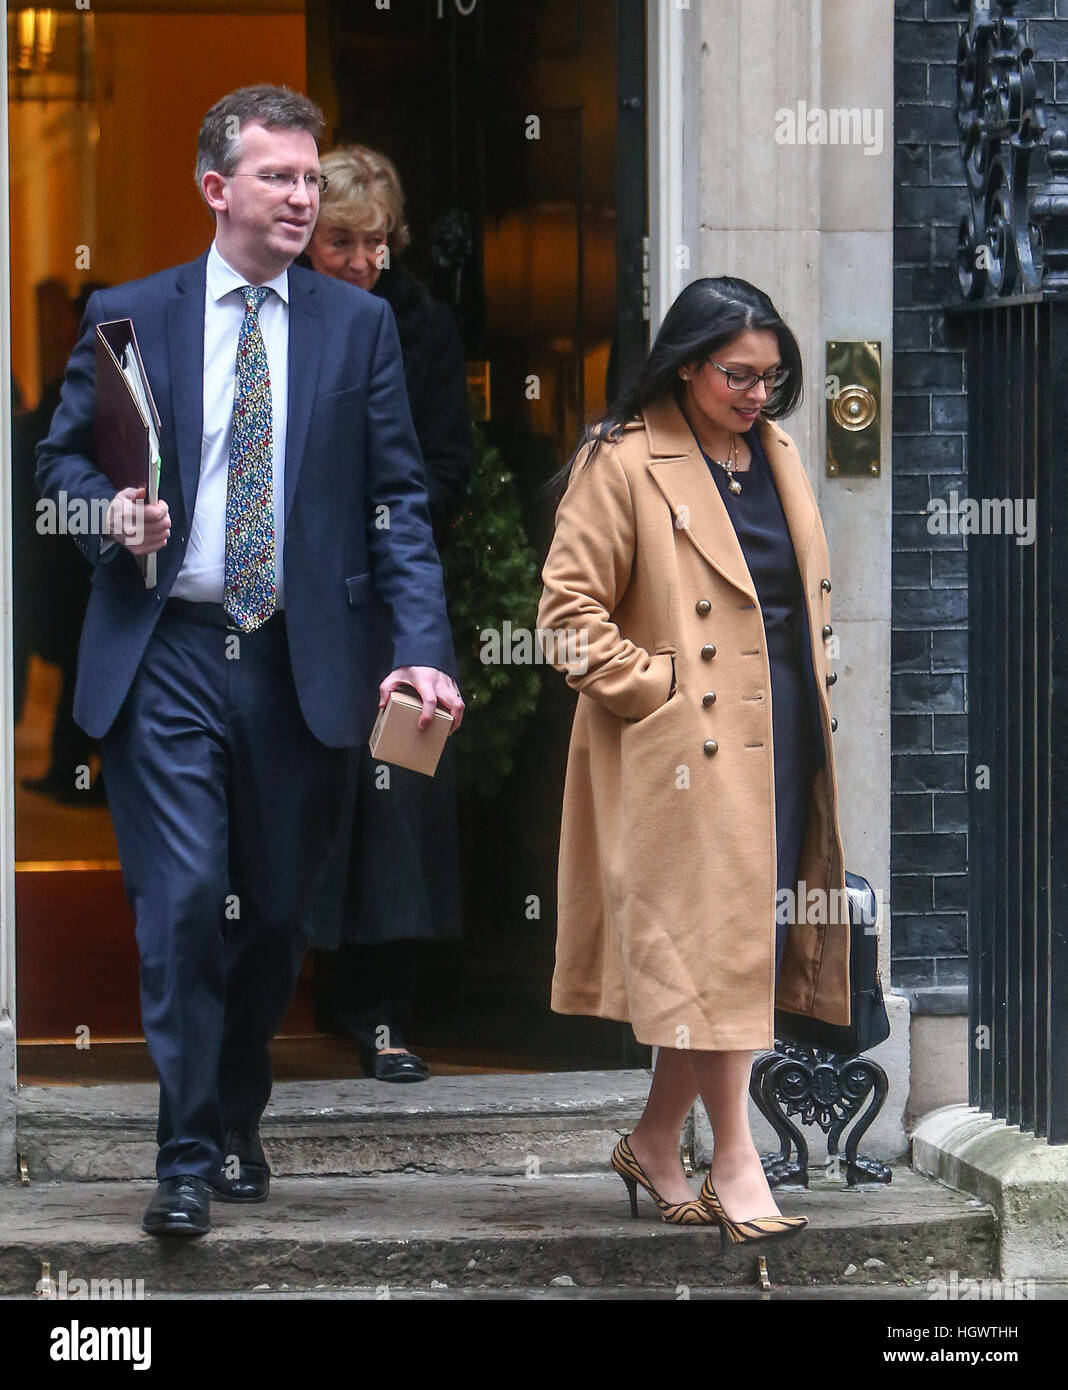 Ministers attend the weekly Cabinet meeting at 10 Downing Street  Featuring: Jeremy Wright QC, Andrea Leadsom, Pritti Patel Where: London, United Kingdom When: 13 Dec 2016 Stock Photo